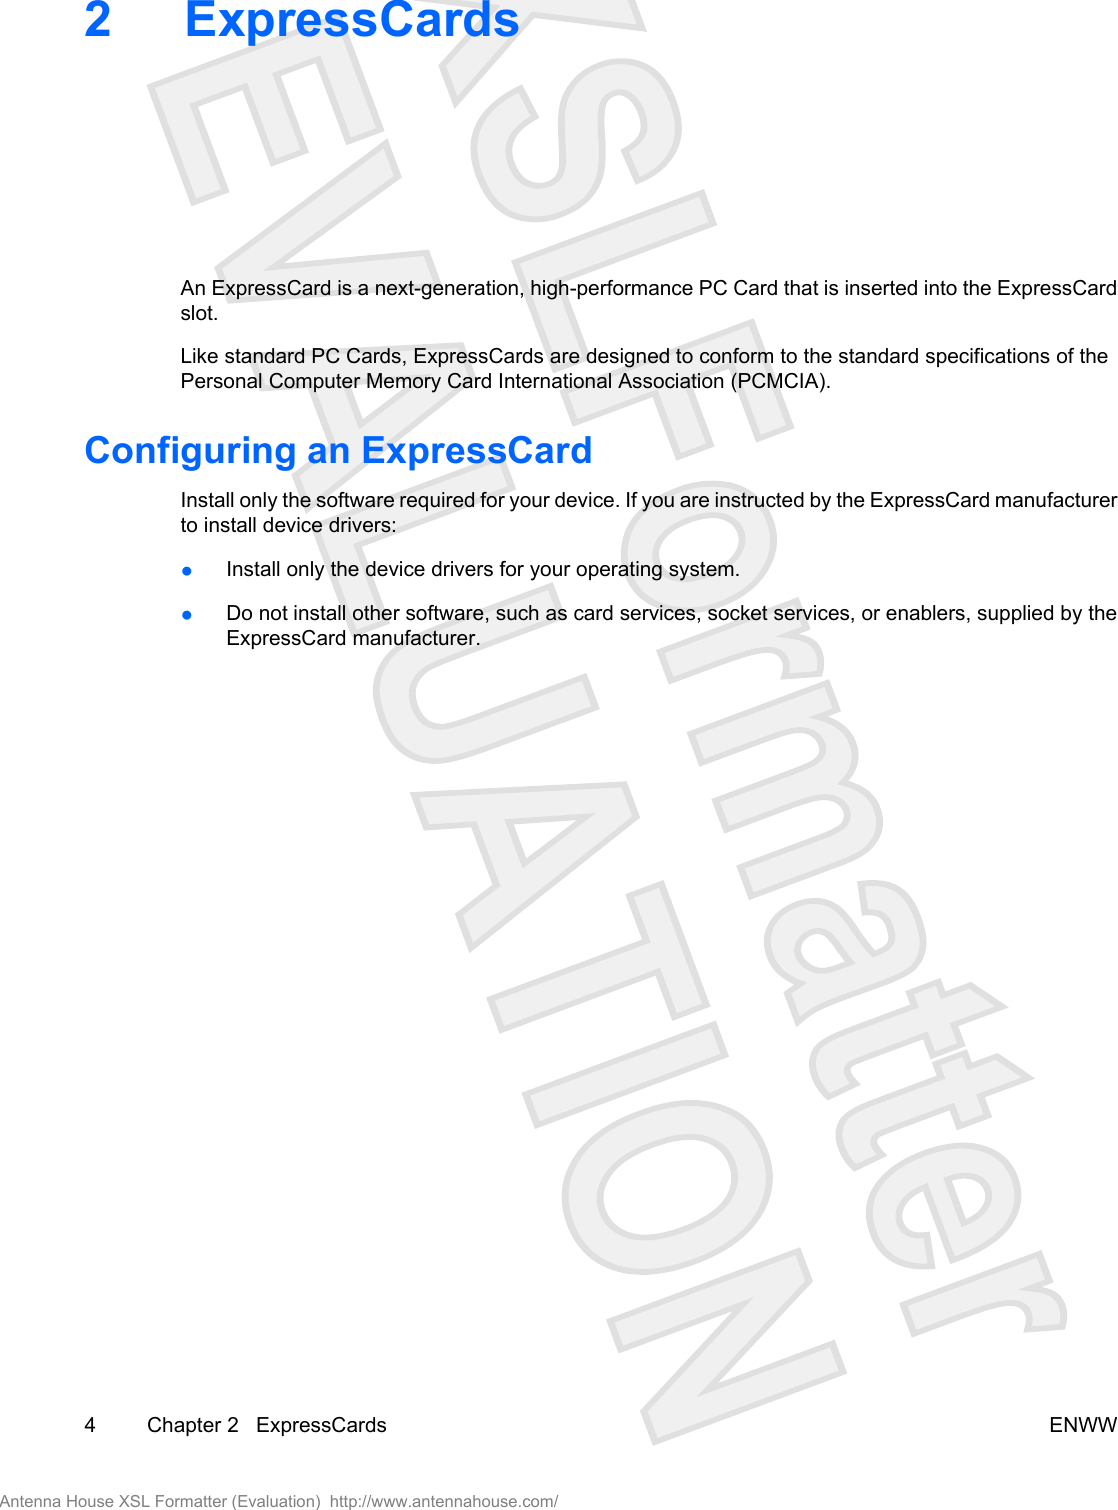 2 ExpressCardsAn ExpressCard is a next-generation, high-performance PC Card that is inserted into the ExpressCardslot.Like standard PC Cards, ExpressCards are designed to conform to the standard specifications of thePersonal Computer Memory Card International Association (PCMCIA).Configuring an ExpressCardInstall only the software required for your device. If you are instructed by the ExpressCard manufacturerto install device drivers:●Install only the device drivers for your operating system.●Do not install other software, such as card services, socket services, or enablers, supplied by theExpressCard manufacturer.4 Chapter 2   ExpressCards ENWWAntenna House XSL Formatter (Evaluation)  http://www.antennahouse.com/